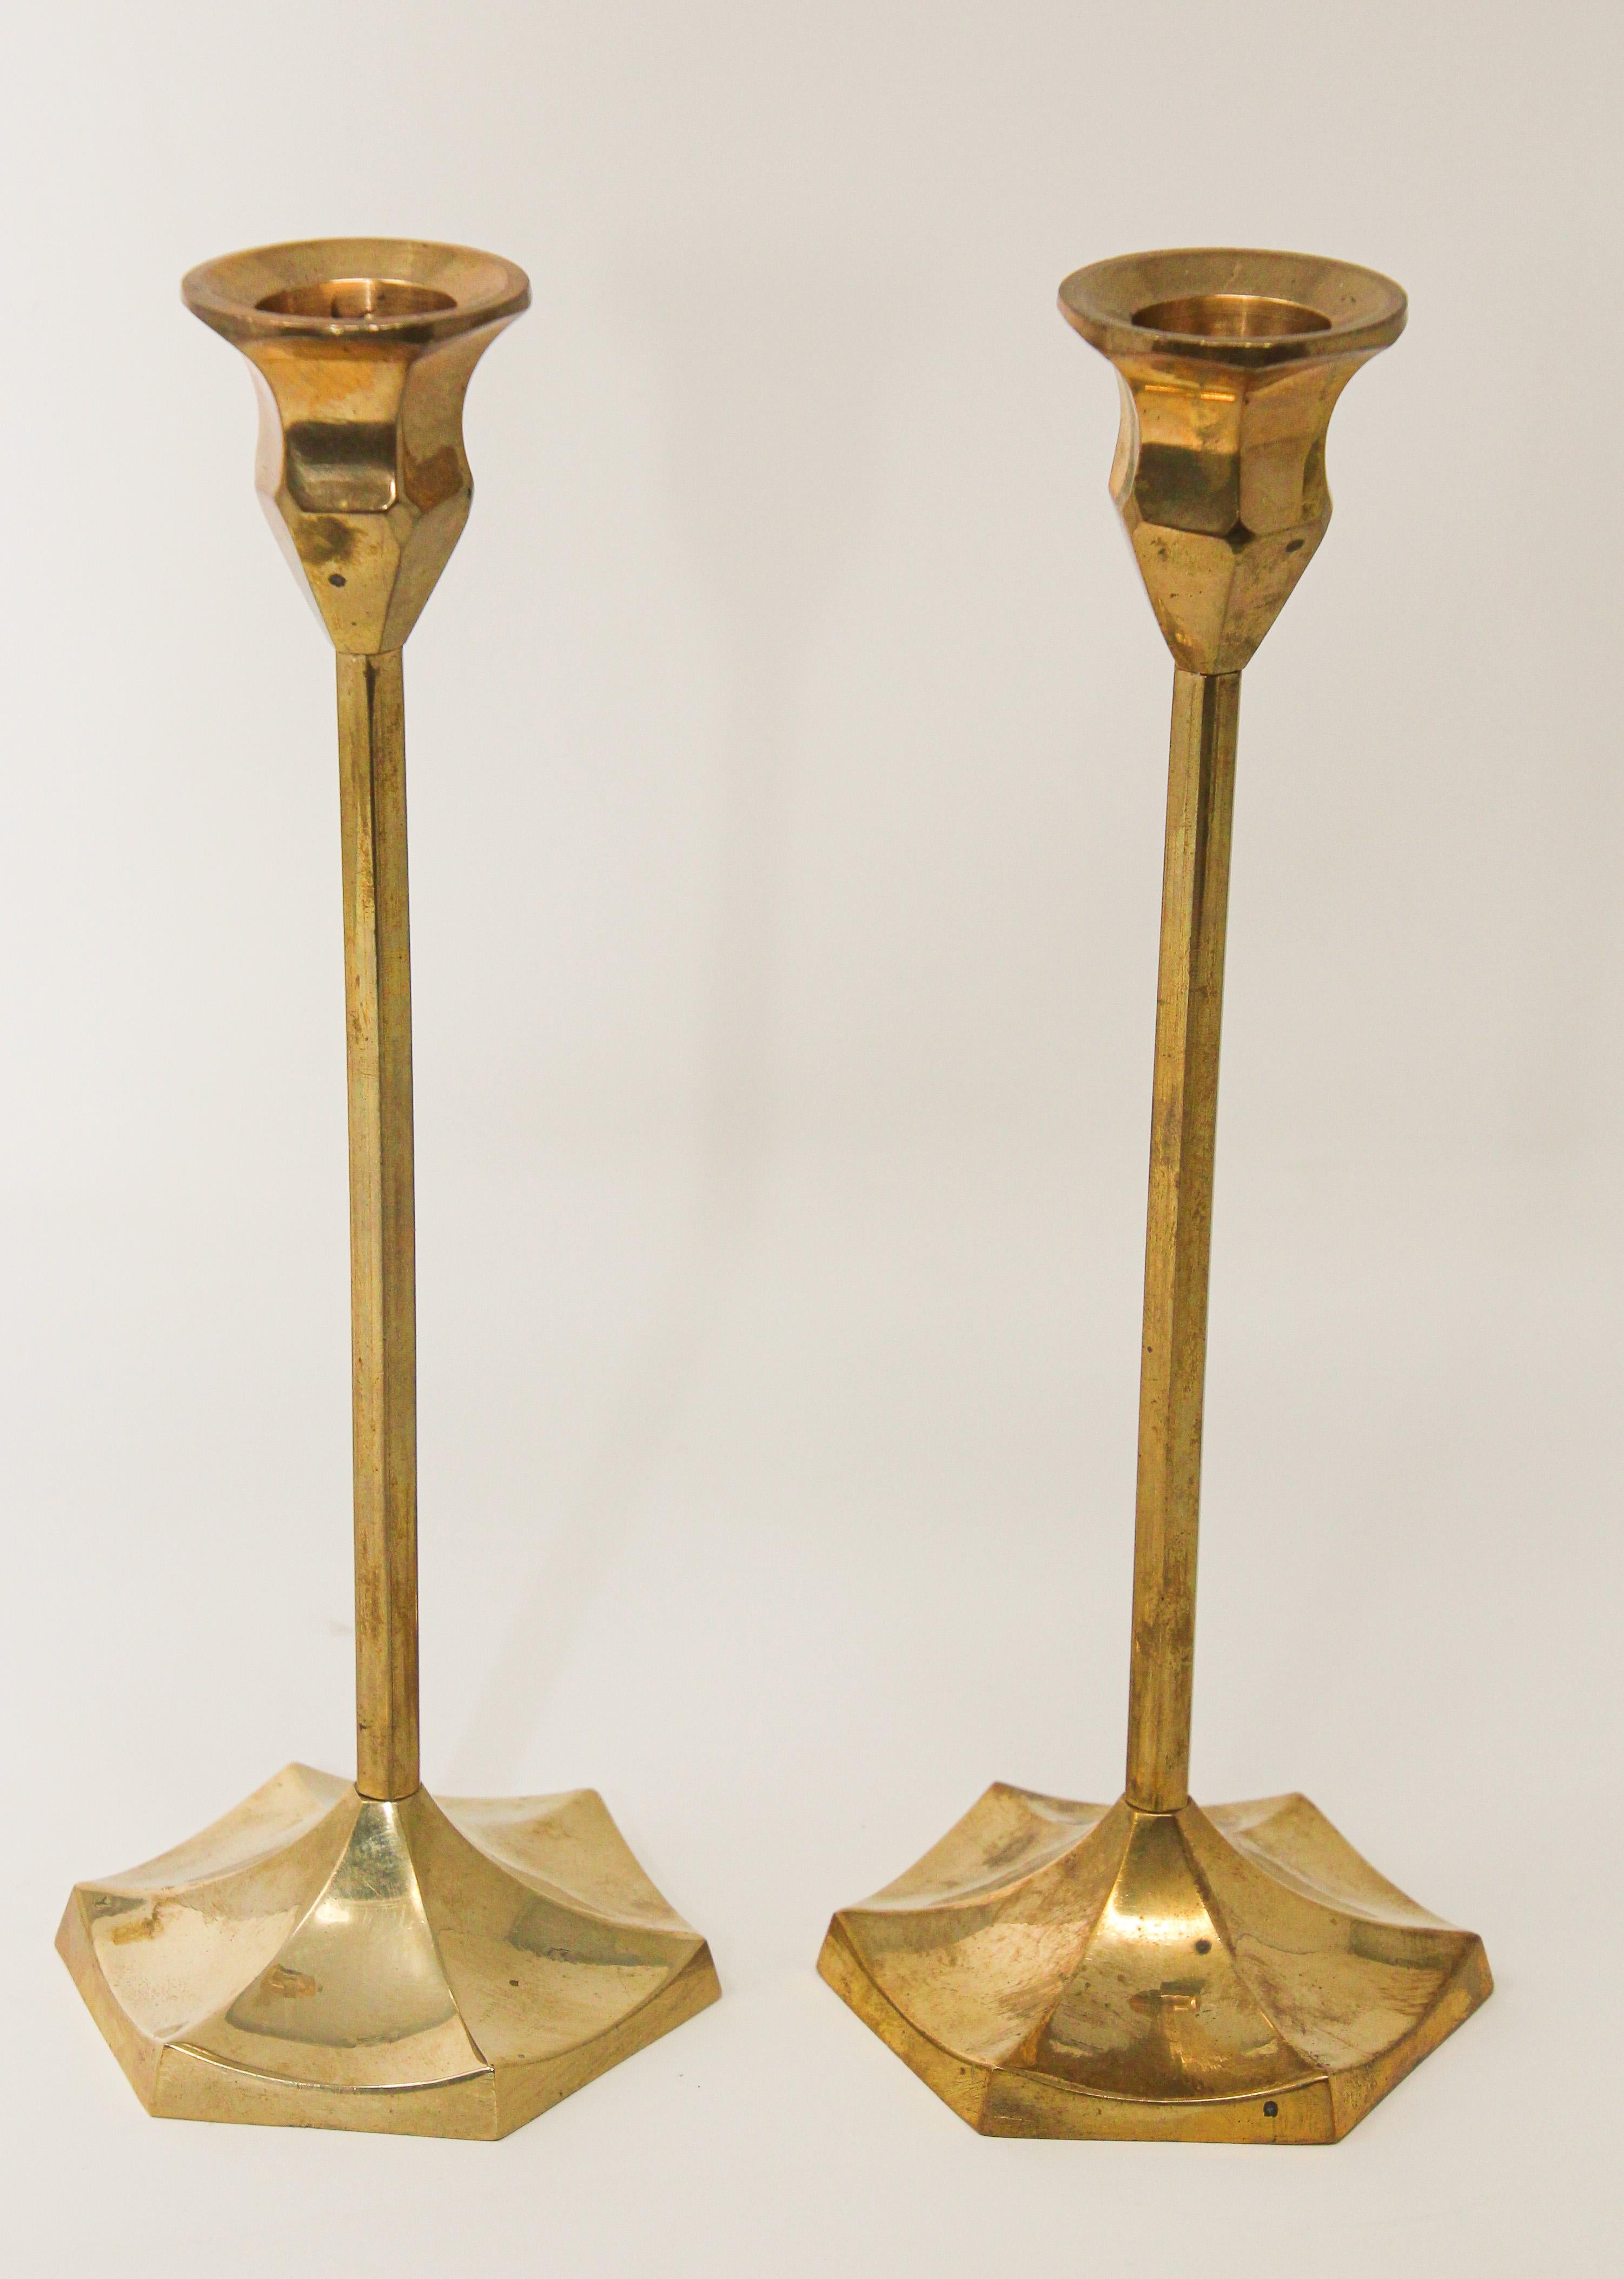 Pair of Polished Vintage Swedish Brass Candlesticks In Good Condition For Sale In North Hollywood, CA